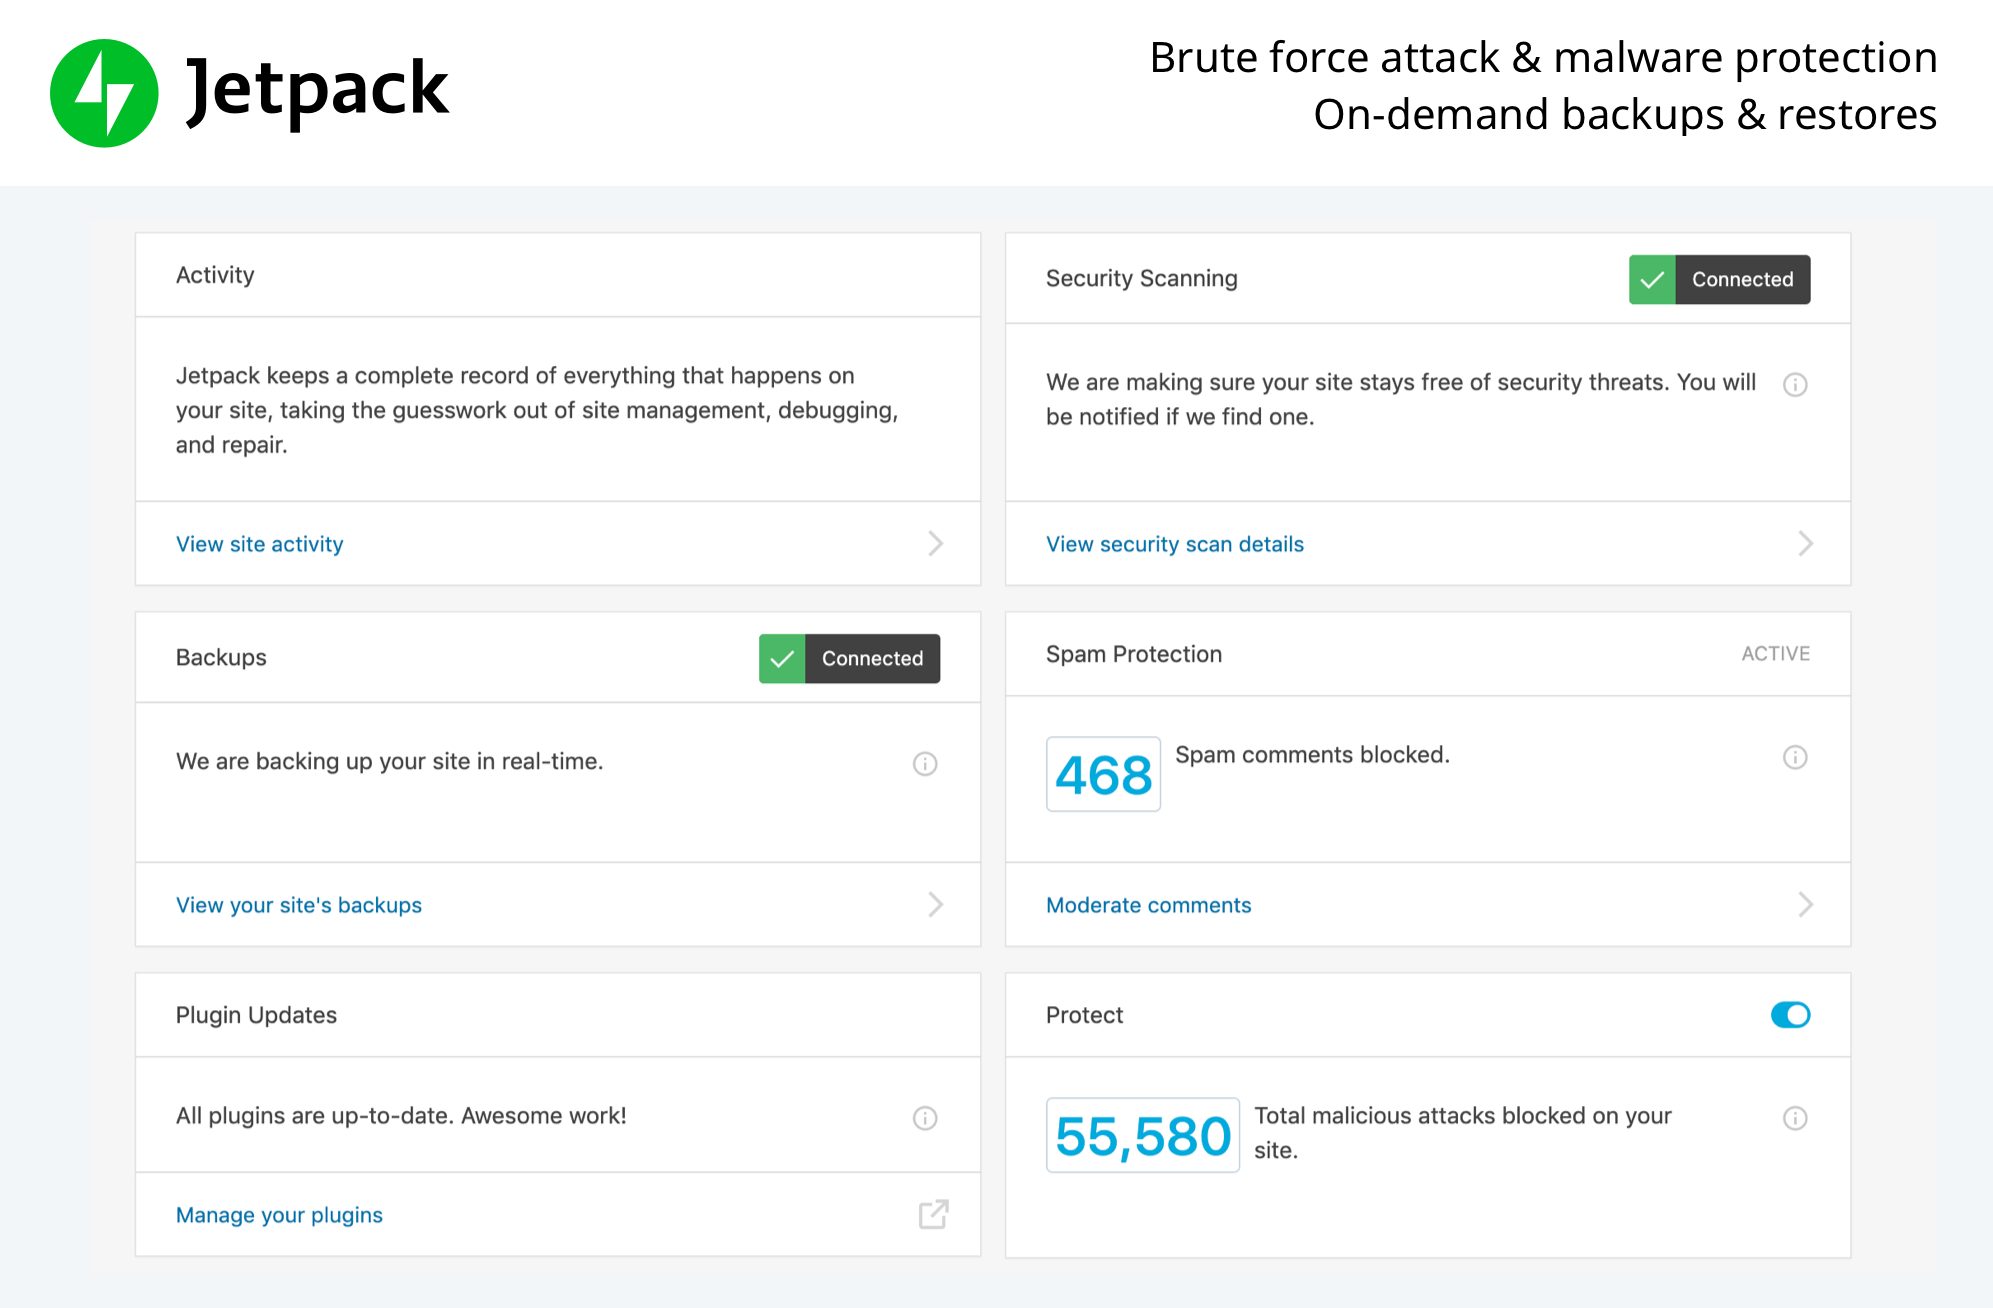 ppwp-jetpack-brute-force-attack